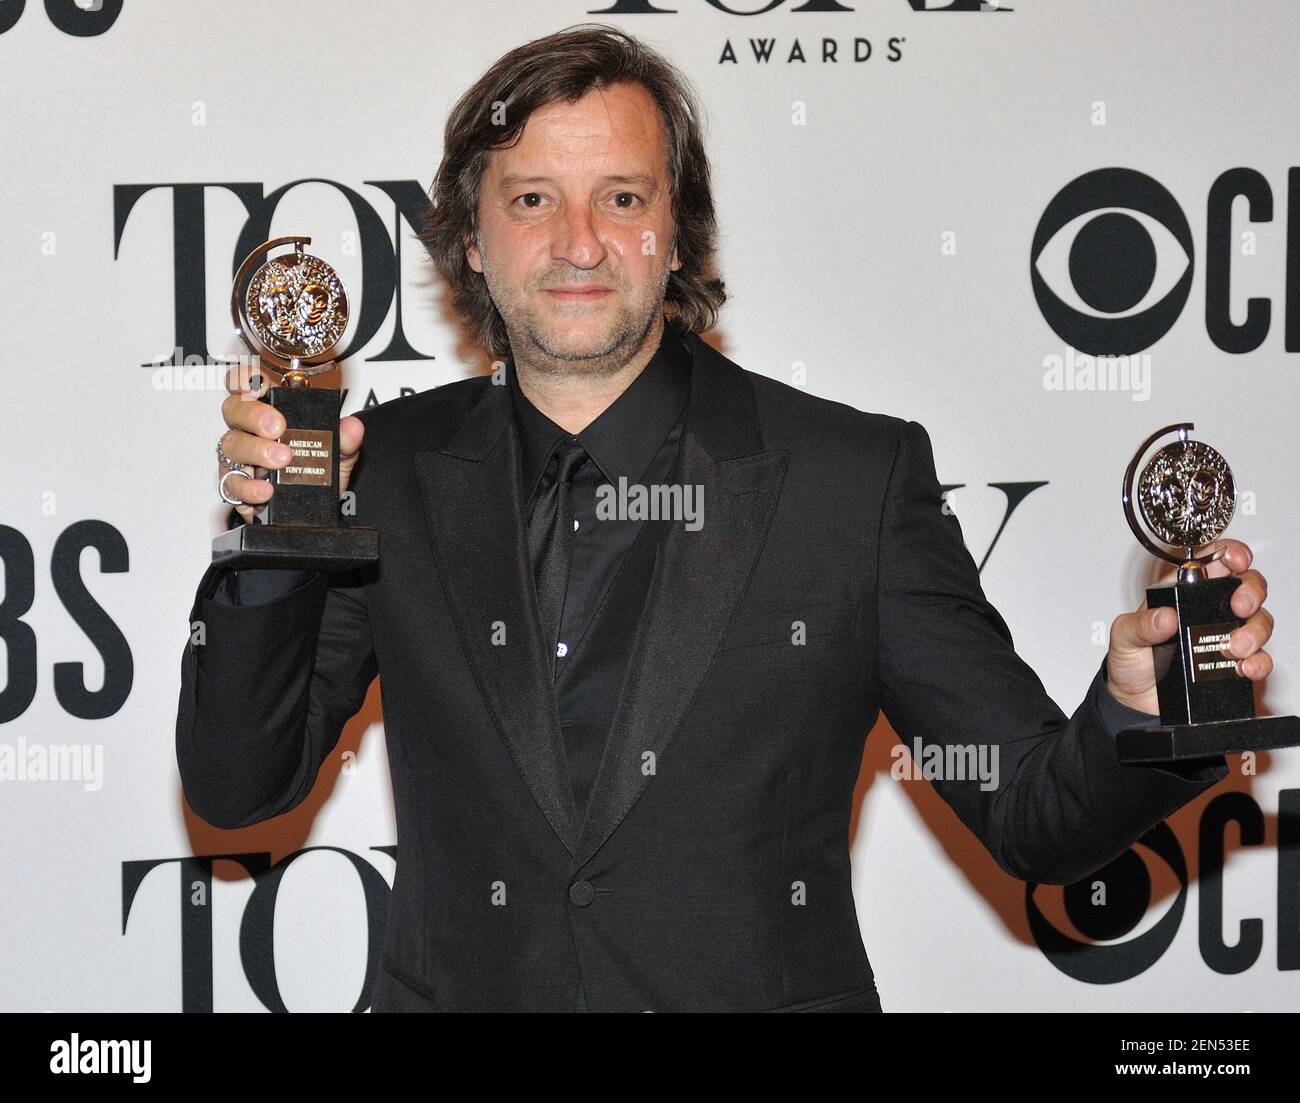 Rob Howell, Tony Award winner for both Best Costume Design of a Play and  Best Scenic Design of a Play, attends the 2019 Tony Awards in New York, NY  on June 9,